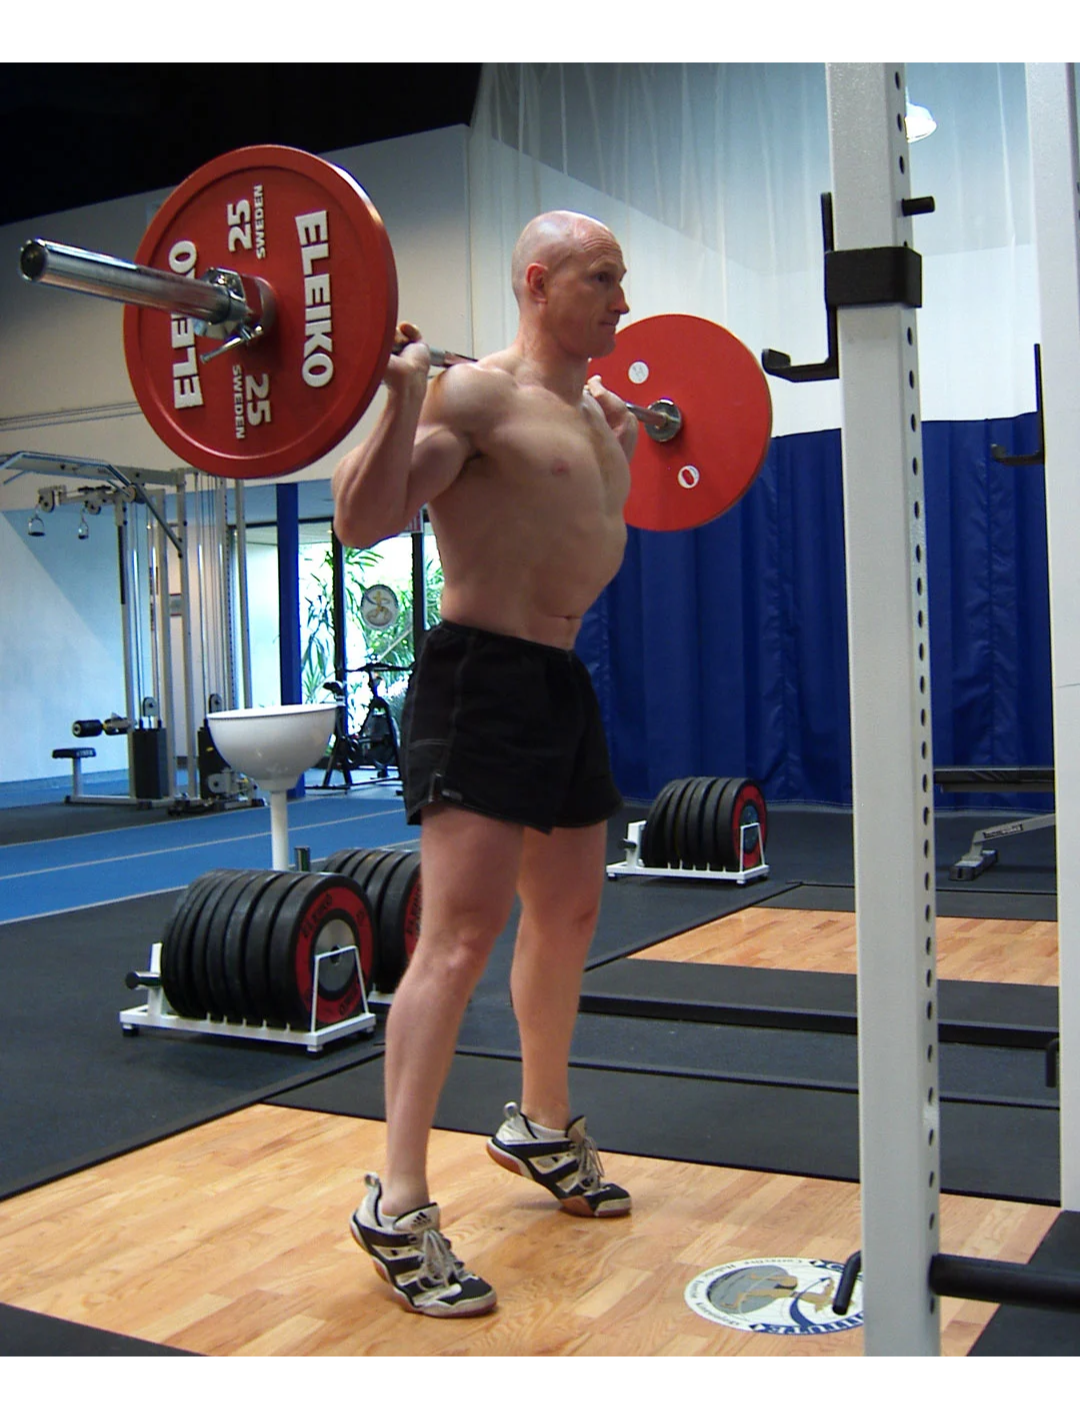 Wrist Straps and Weight Lifting Concerns! » Paul Chek's Blog